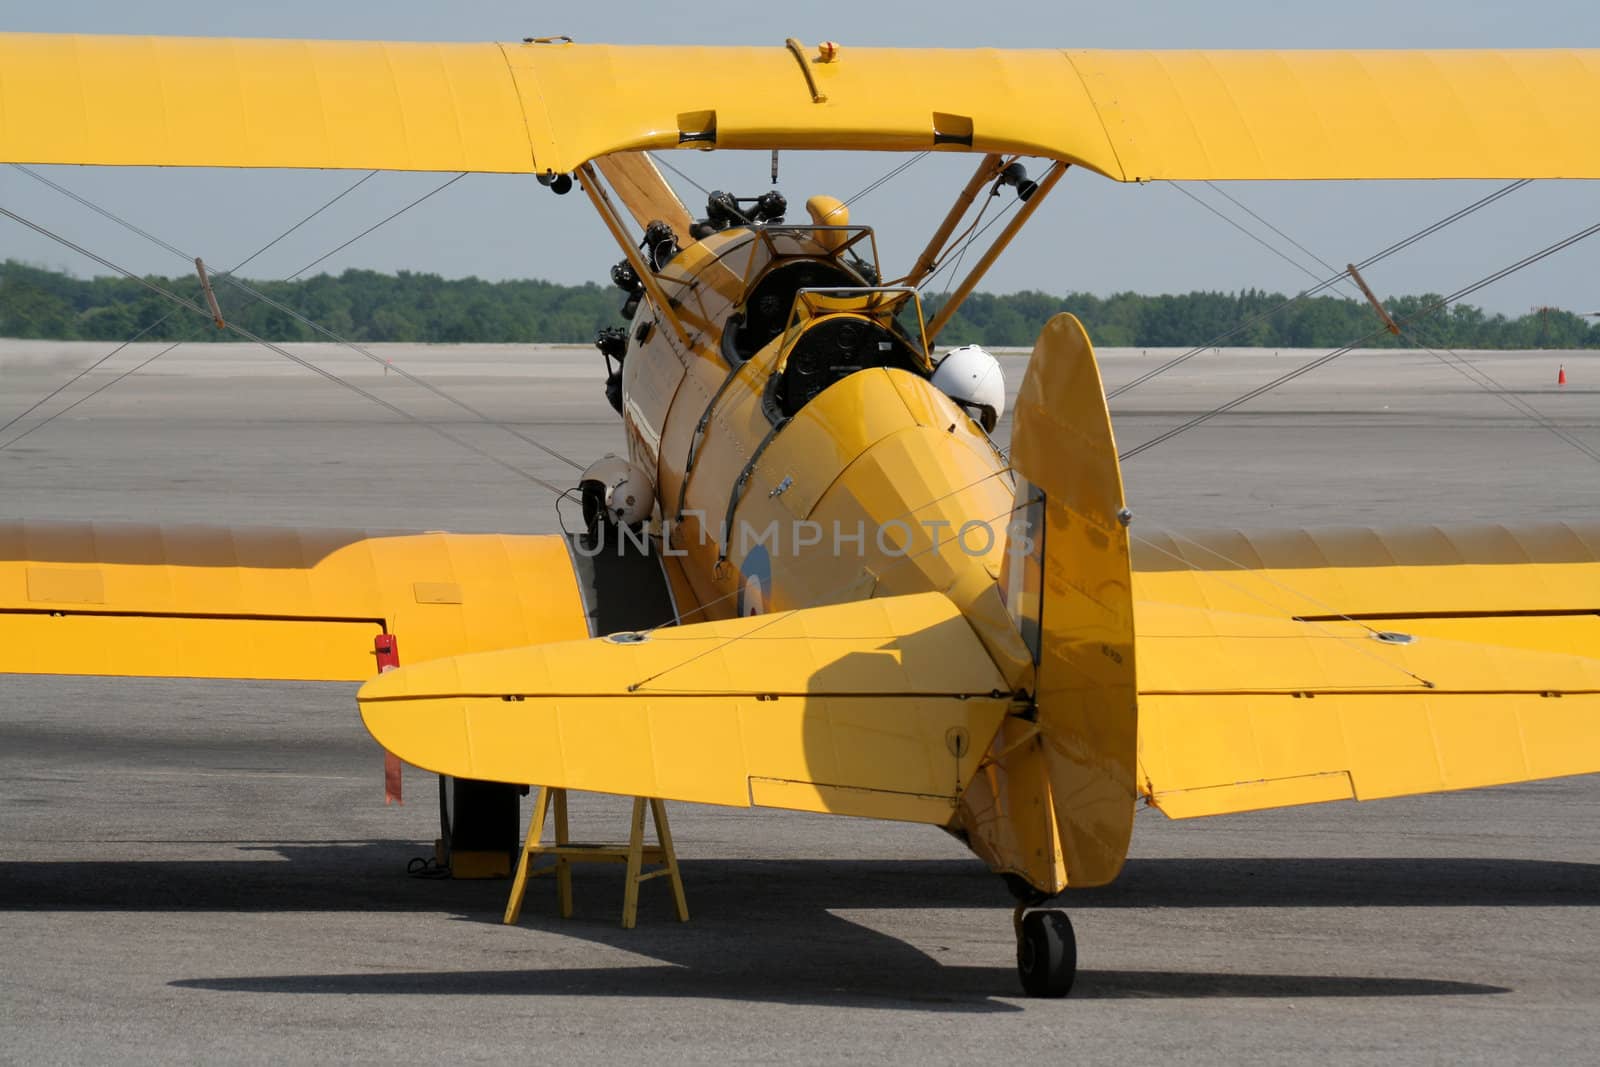 A yellow biplane sitting ready for take-off.